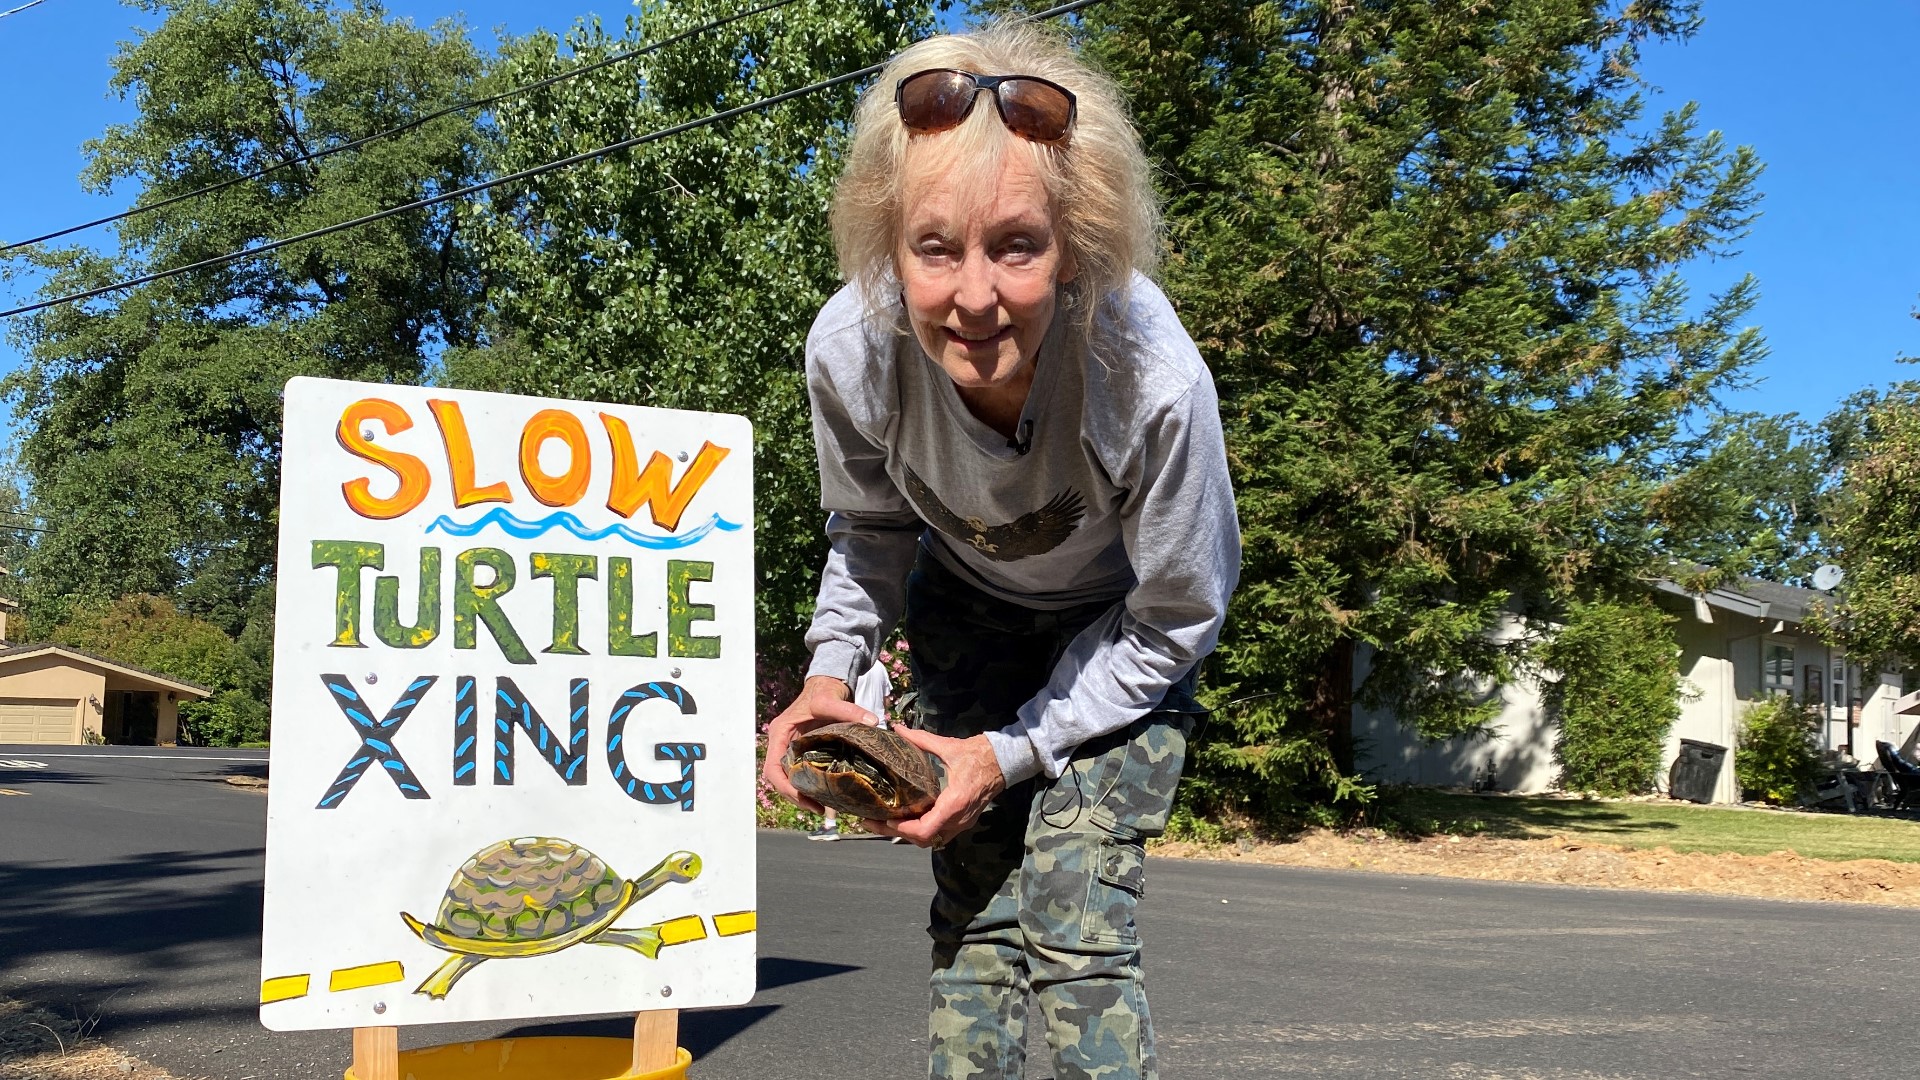 Ruby says people built homes in the turtles' habitat so the least she can do is help them cross the many streets to their nesting spot.